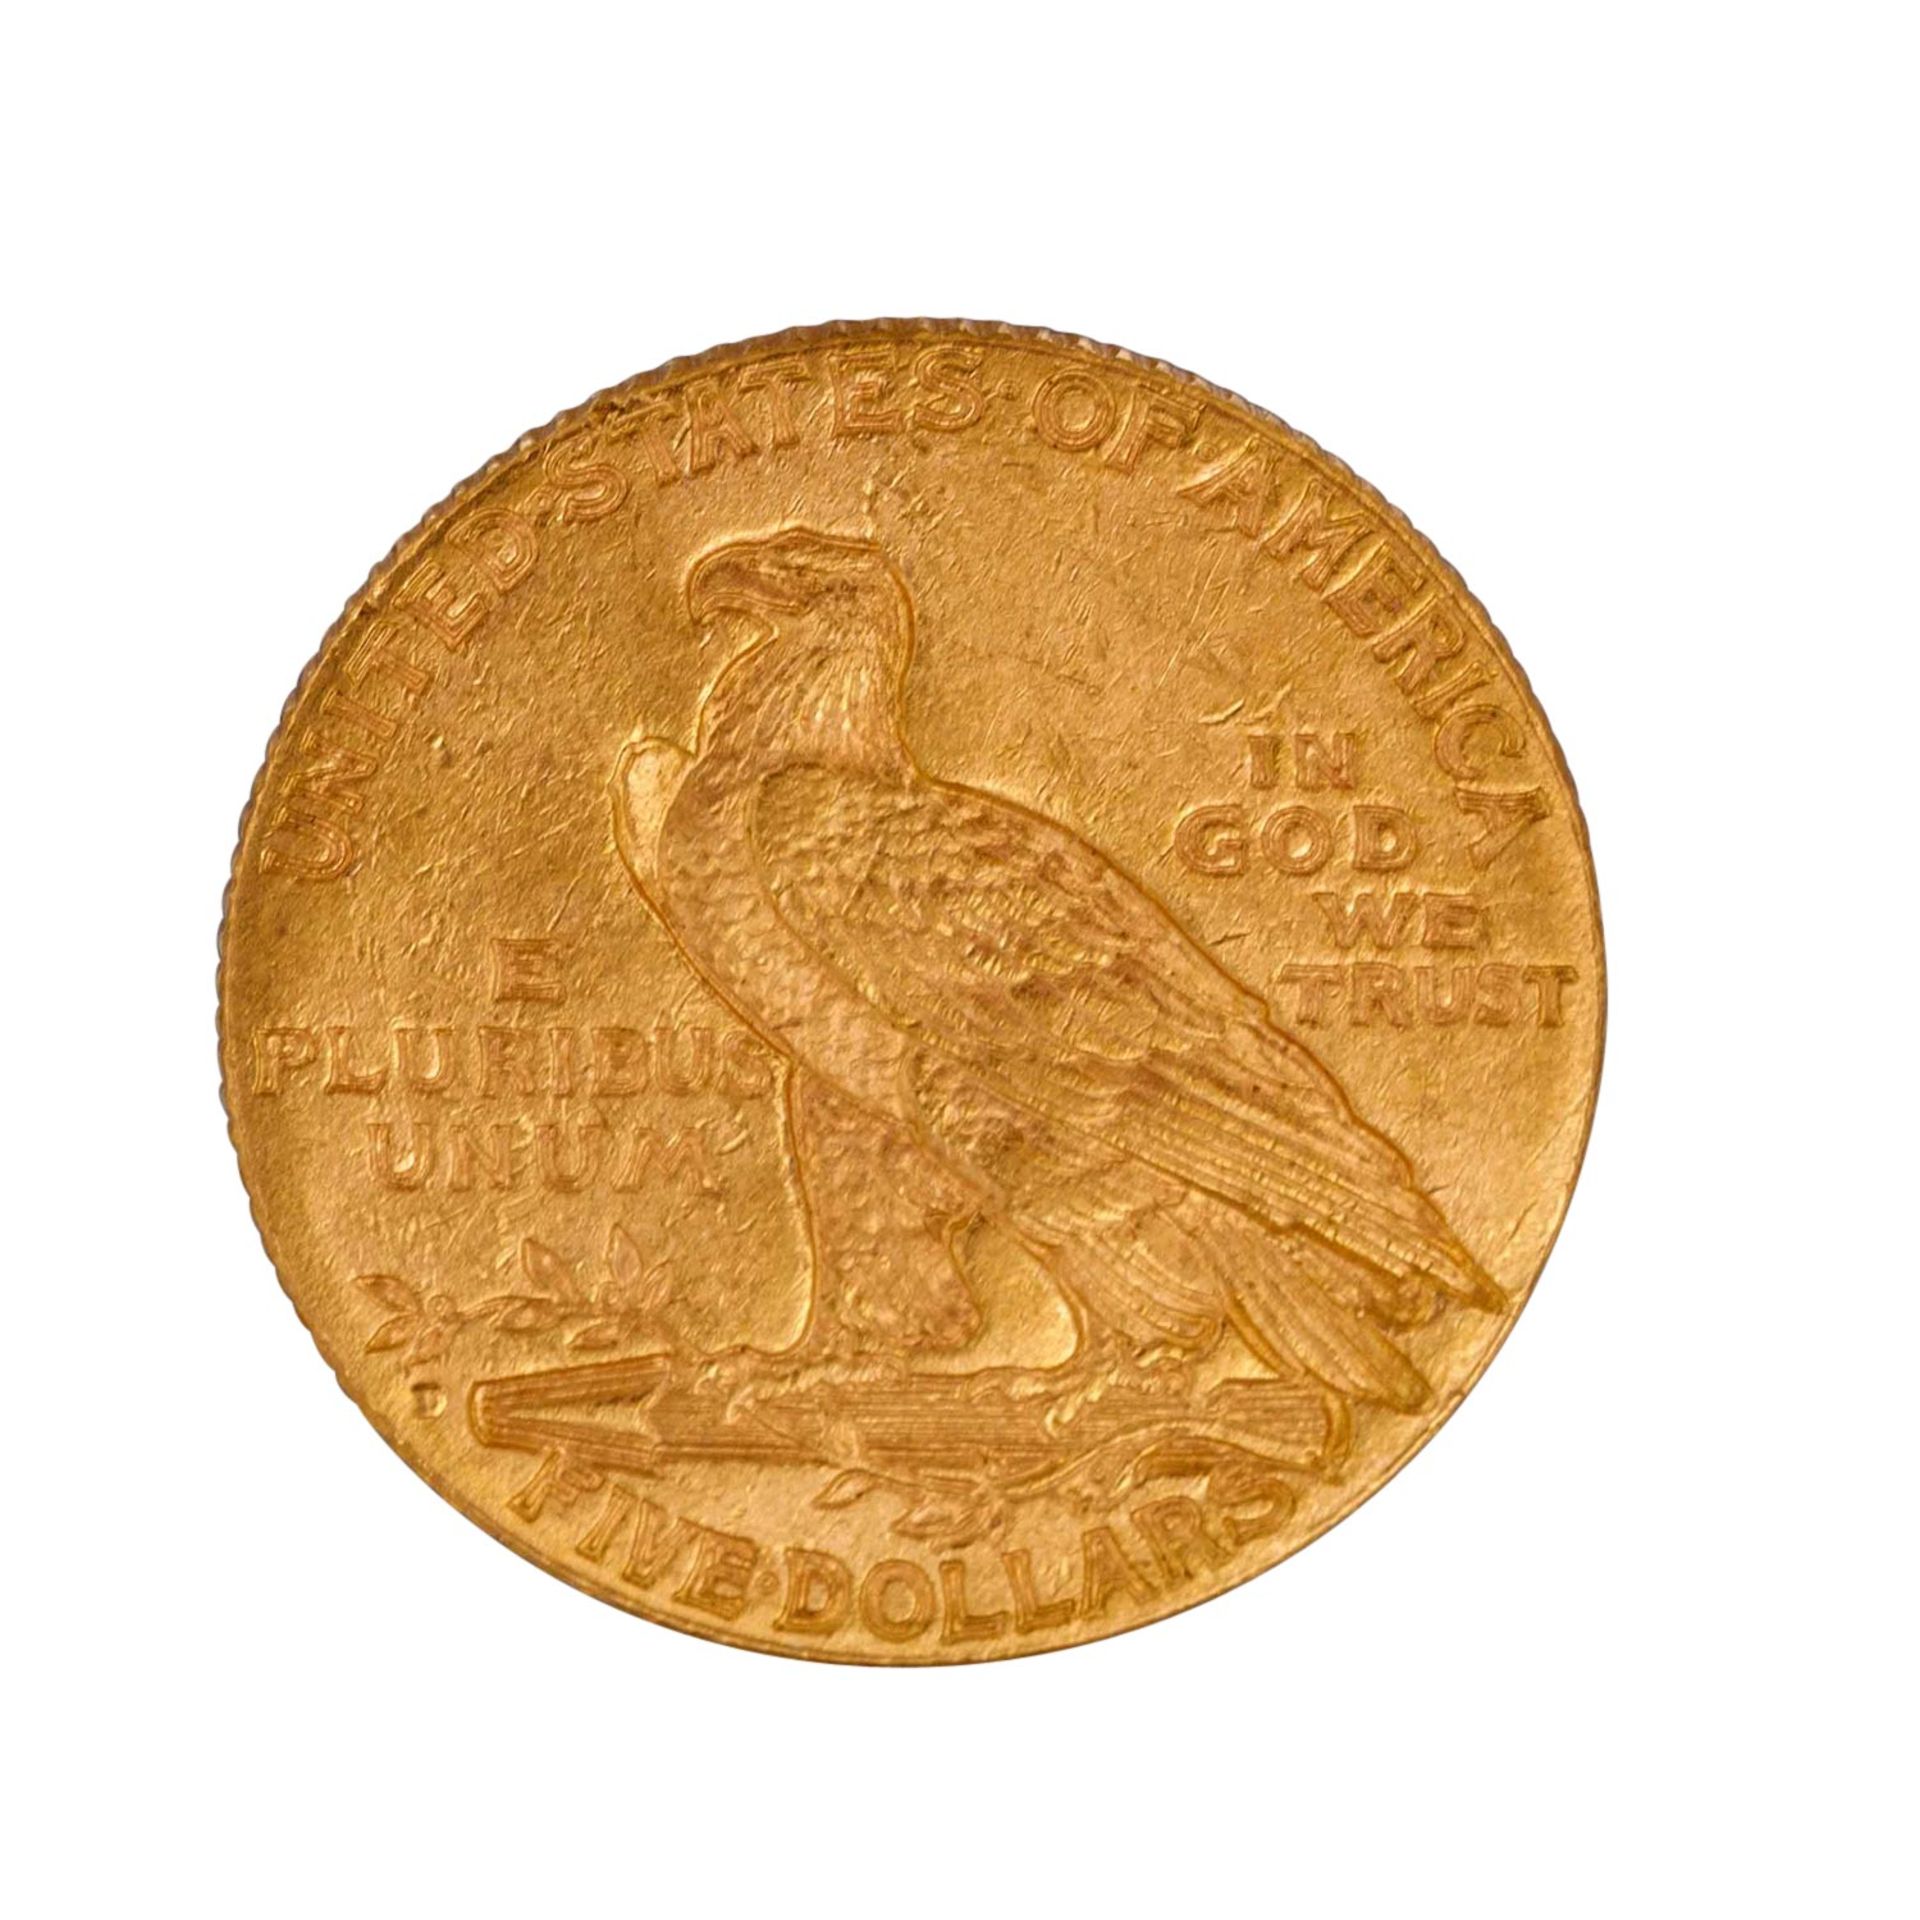 USA /GOLD - 5 Dollar Indian Head 1909 - Image 2 of 2